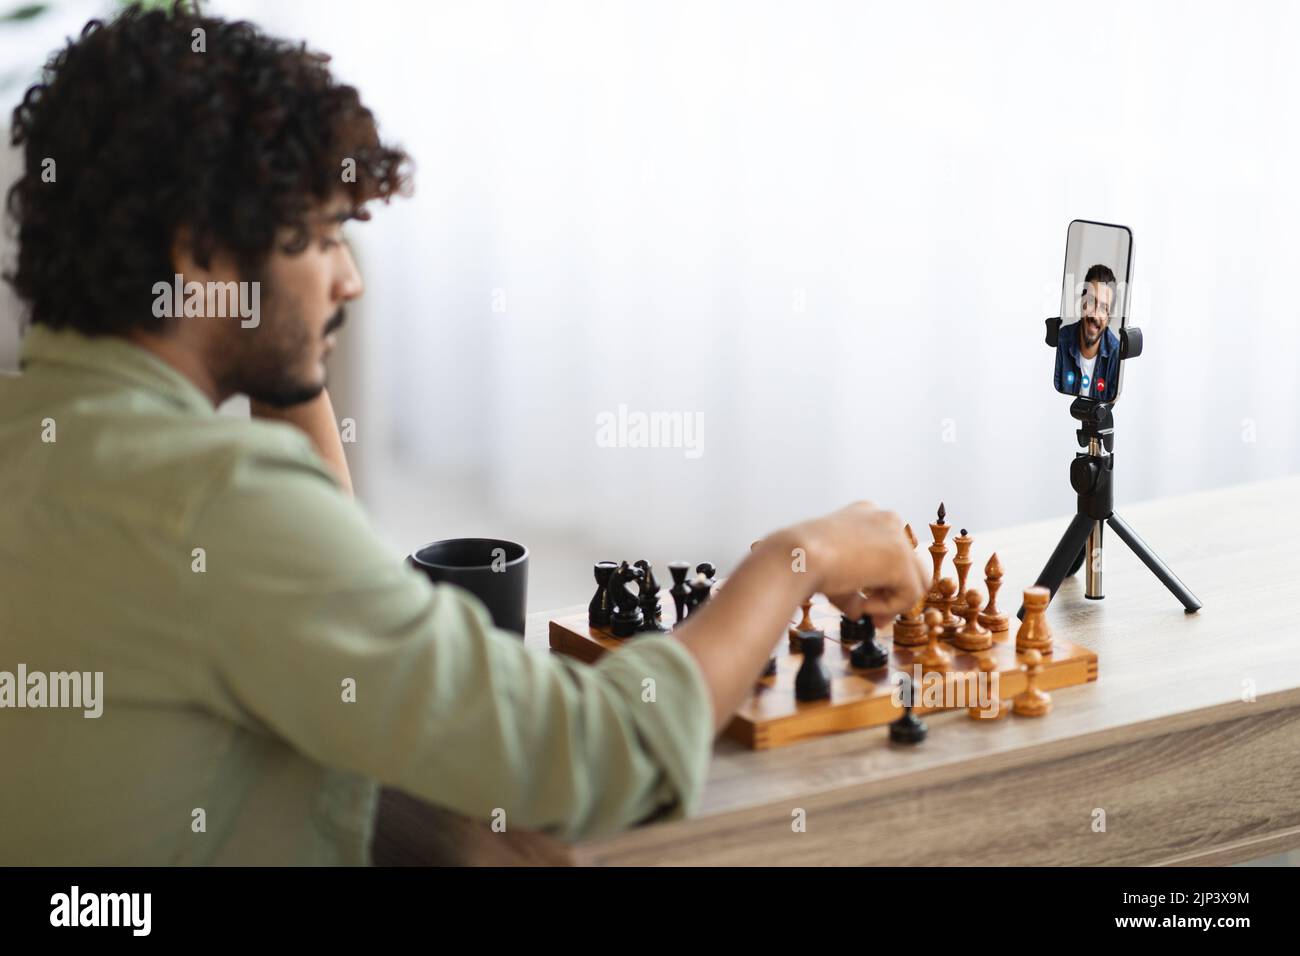 Eastern man playing chess with his friend via video call Stock Photo